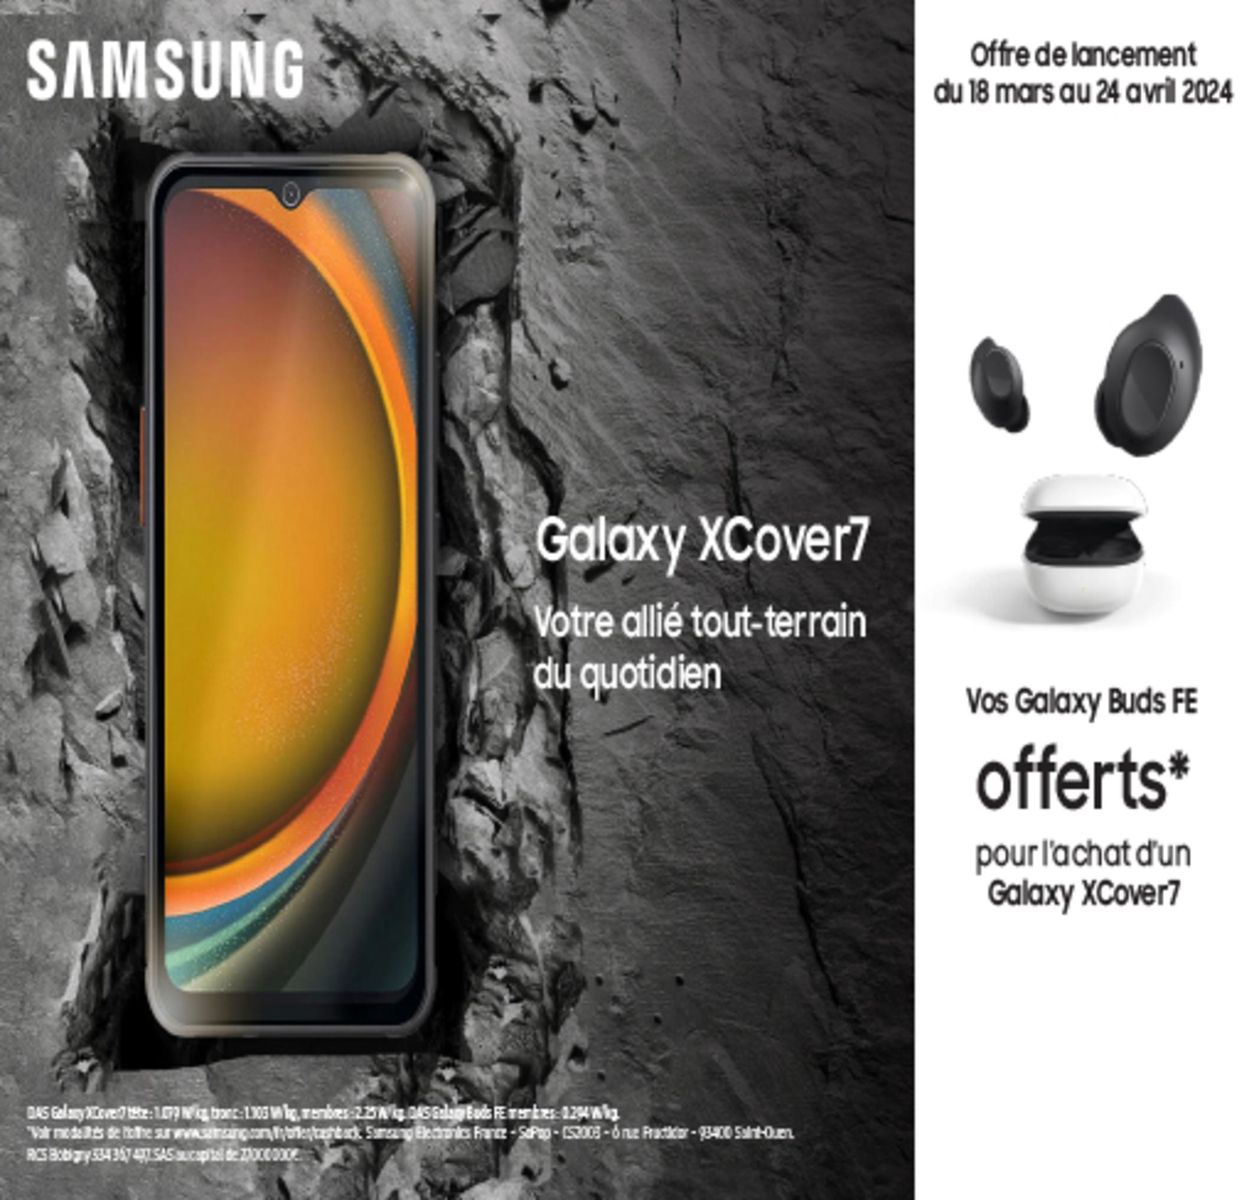 Catalogue VOS GALAXY BUDS FE OFFERTS AVEC SAMSUNG, page 00001